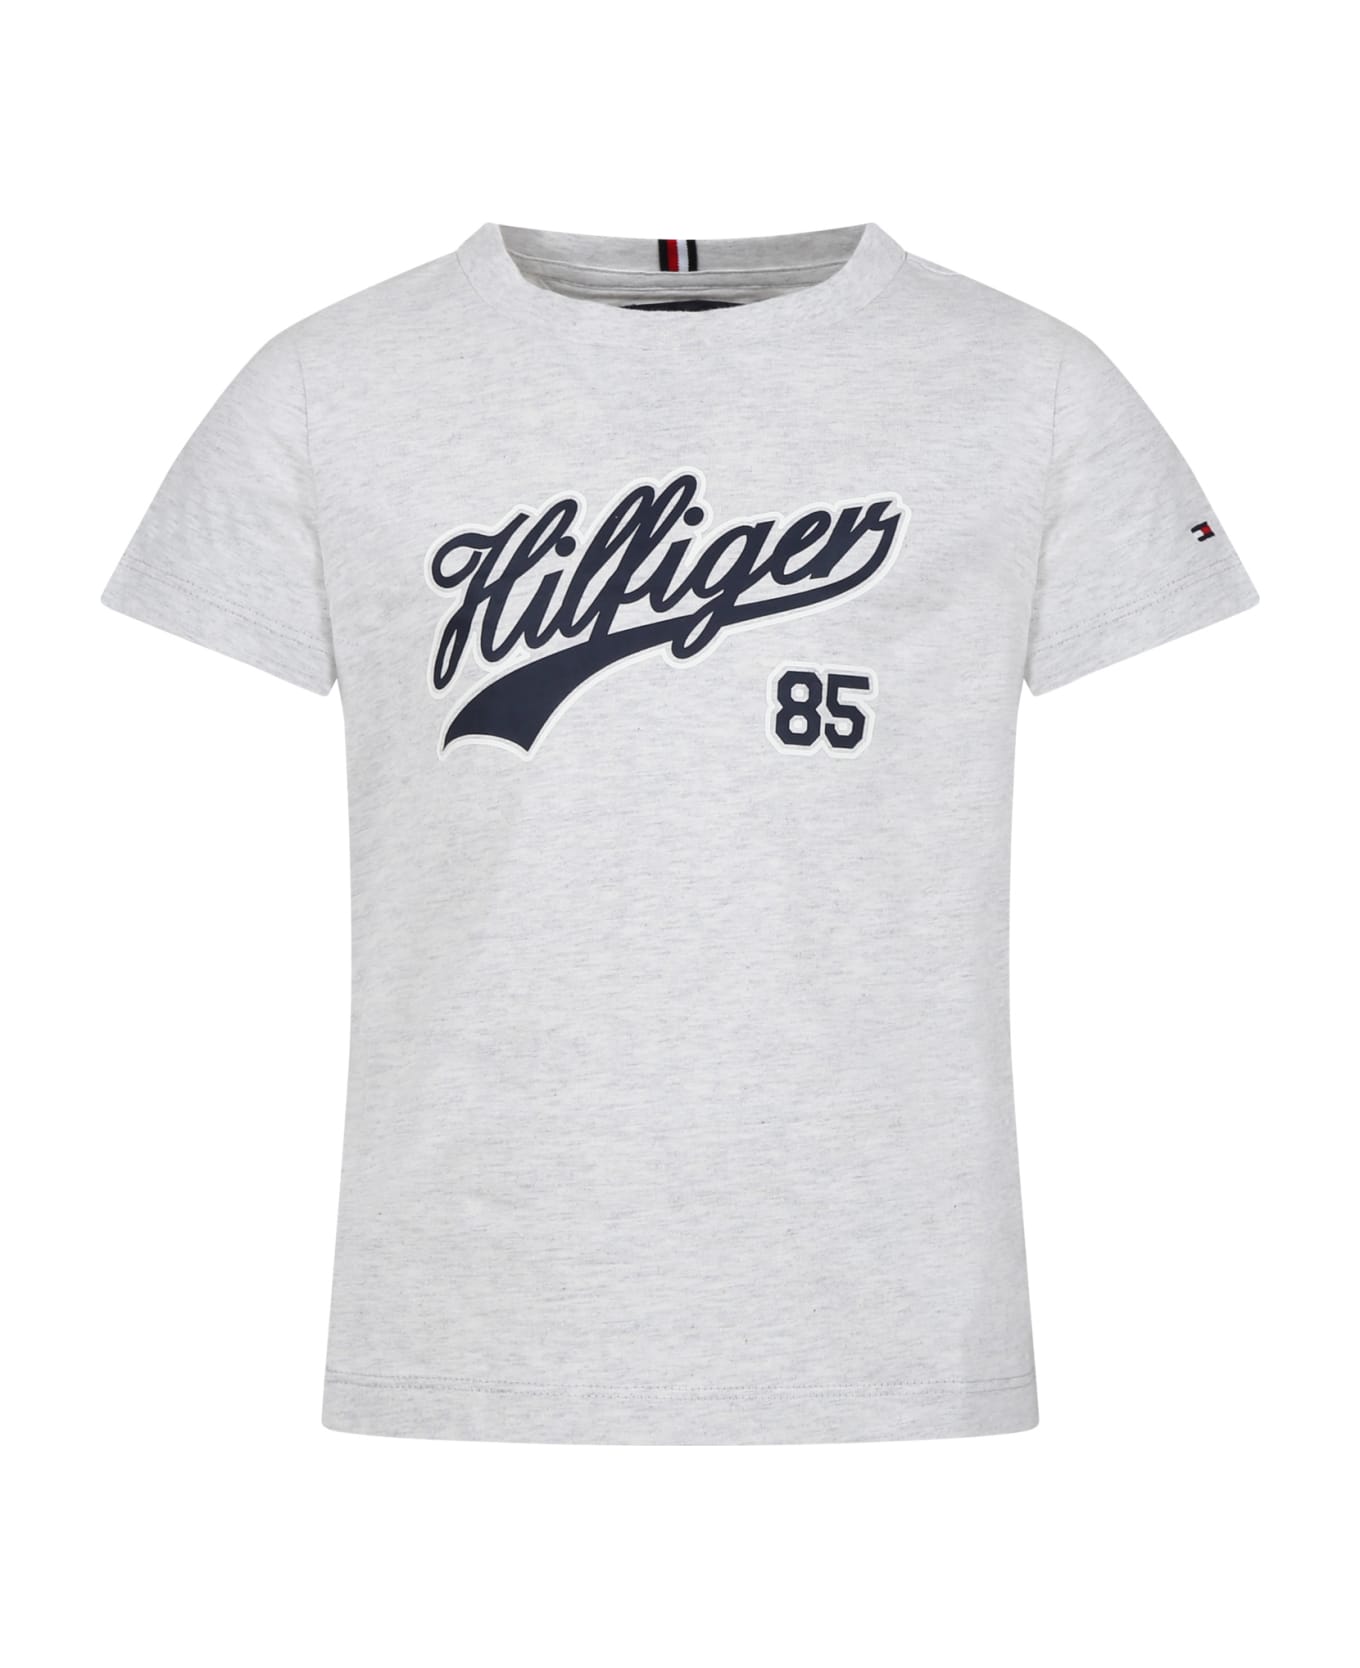 Tommy Hilfiger Gray T-shirt For Boy With Logo - Grey